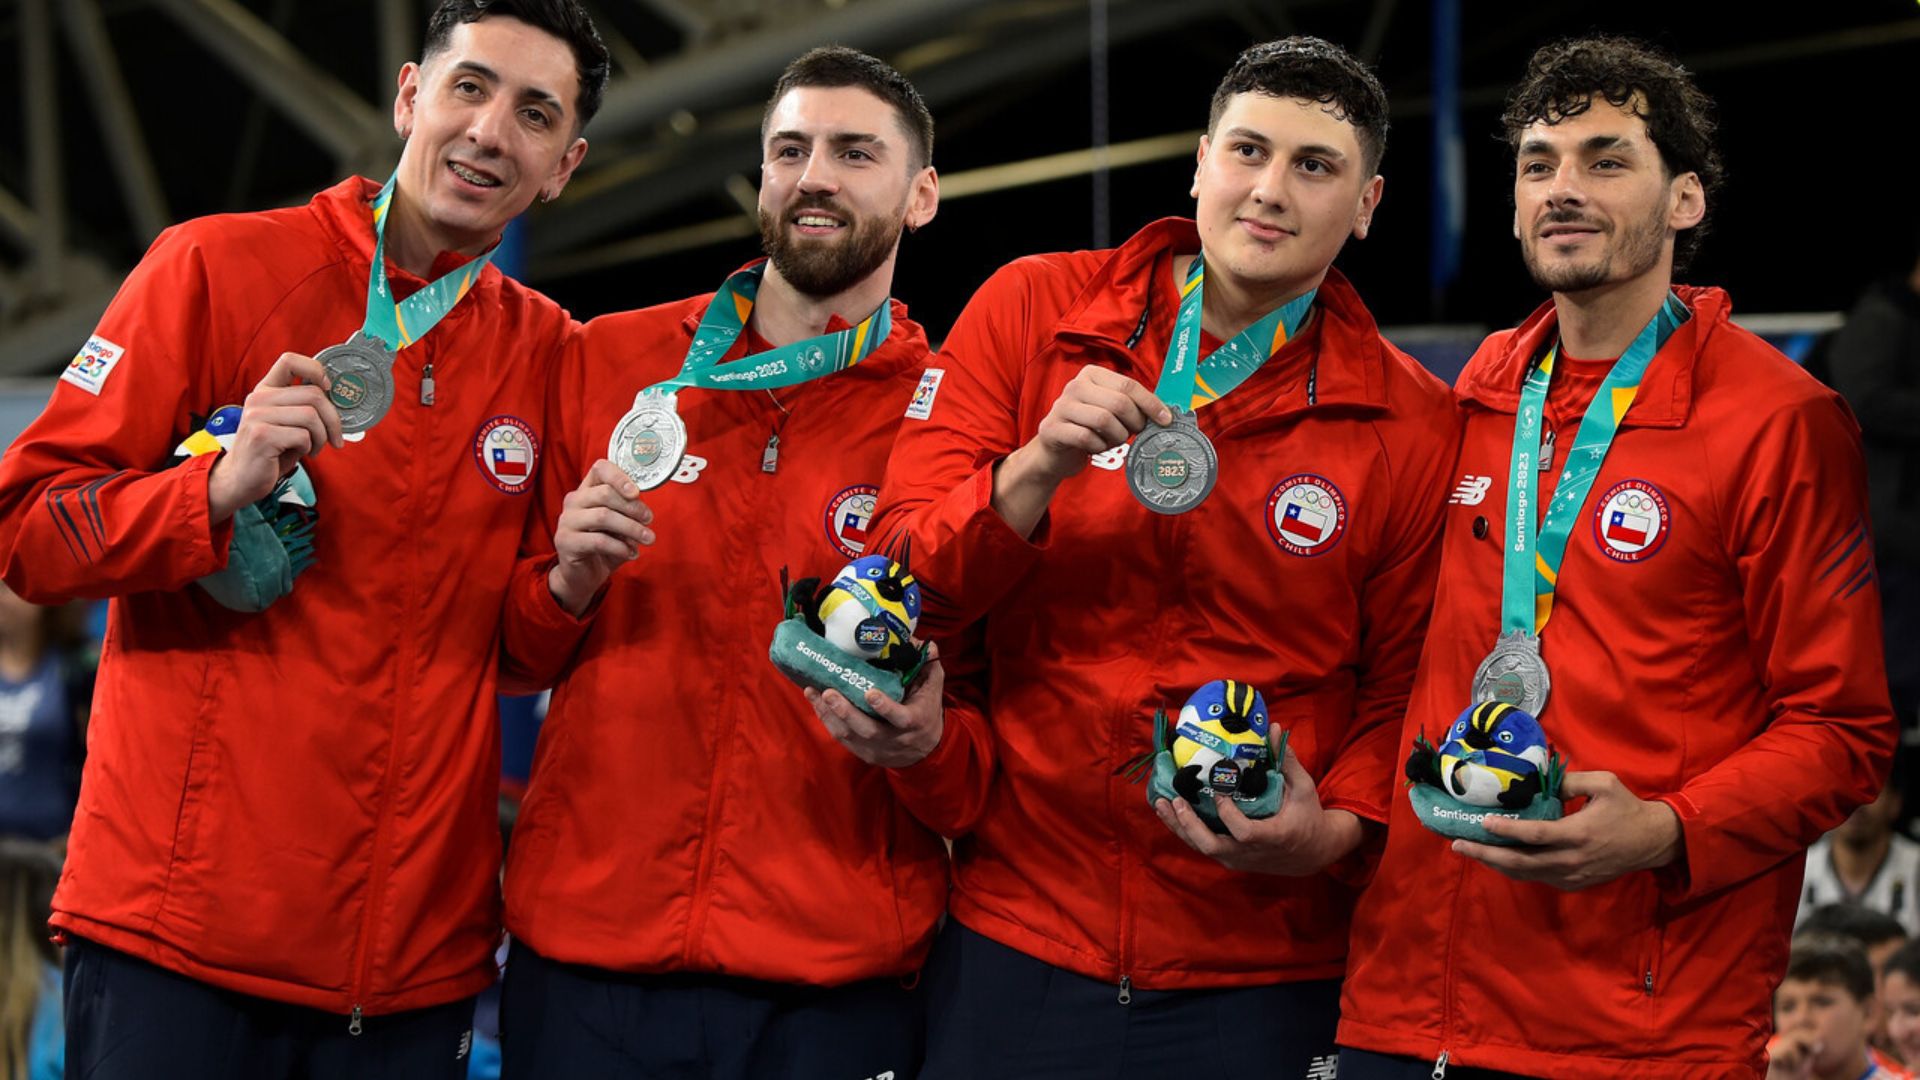 Summary: Productive day with nine medals for Chile